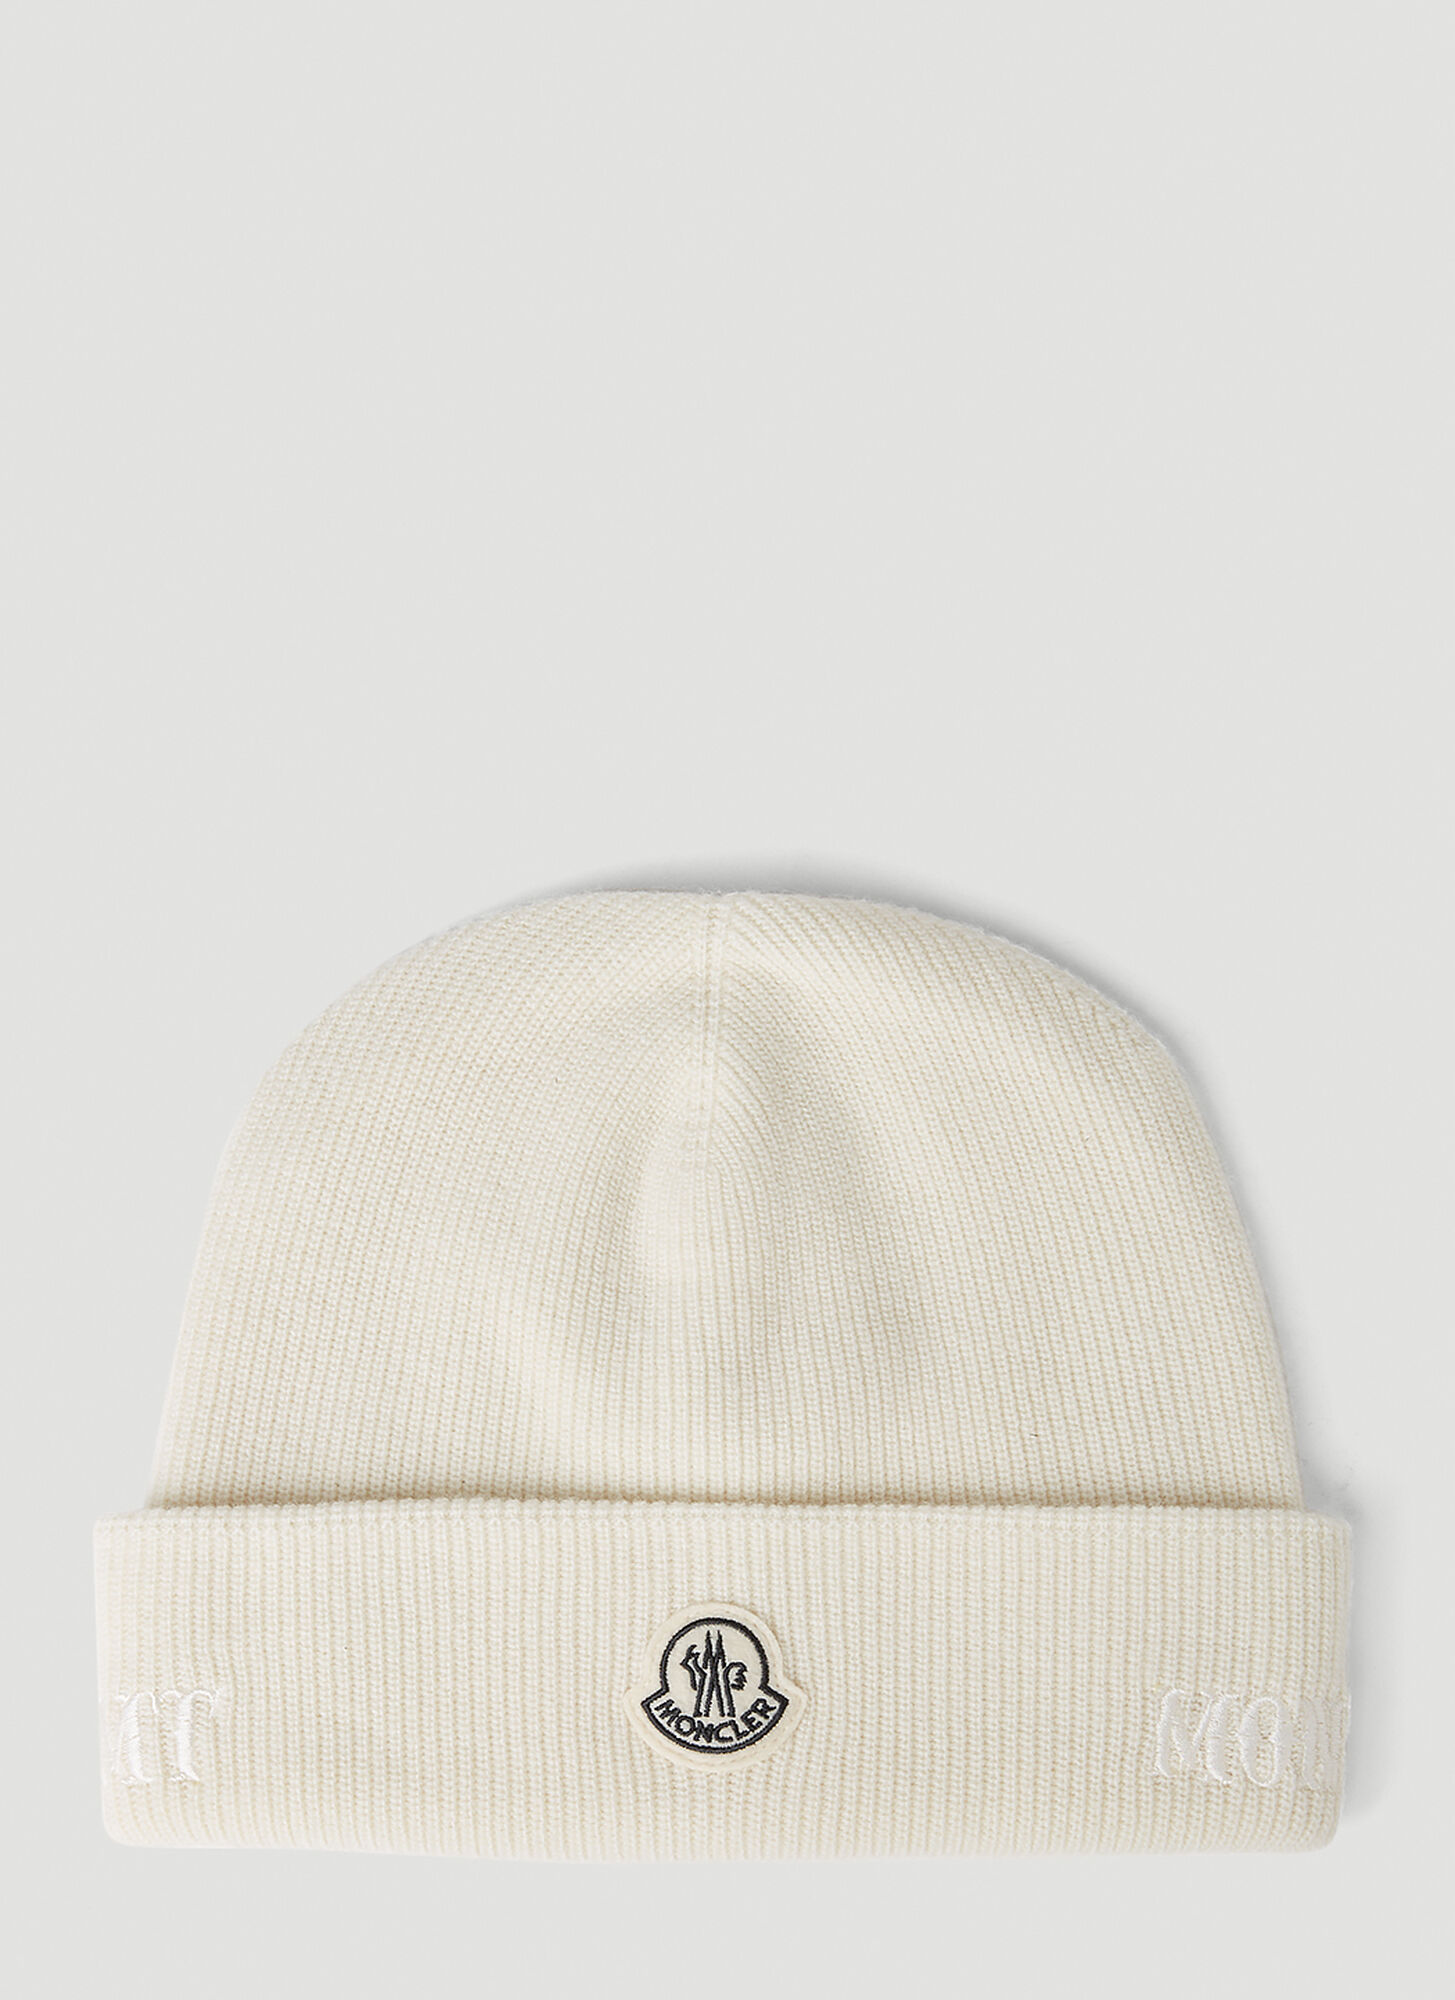 Moncler Genius Logo Embroidery Beanie Hat In White